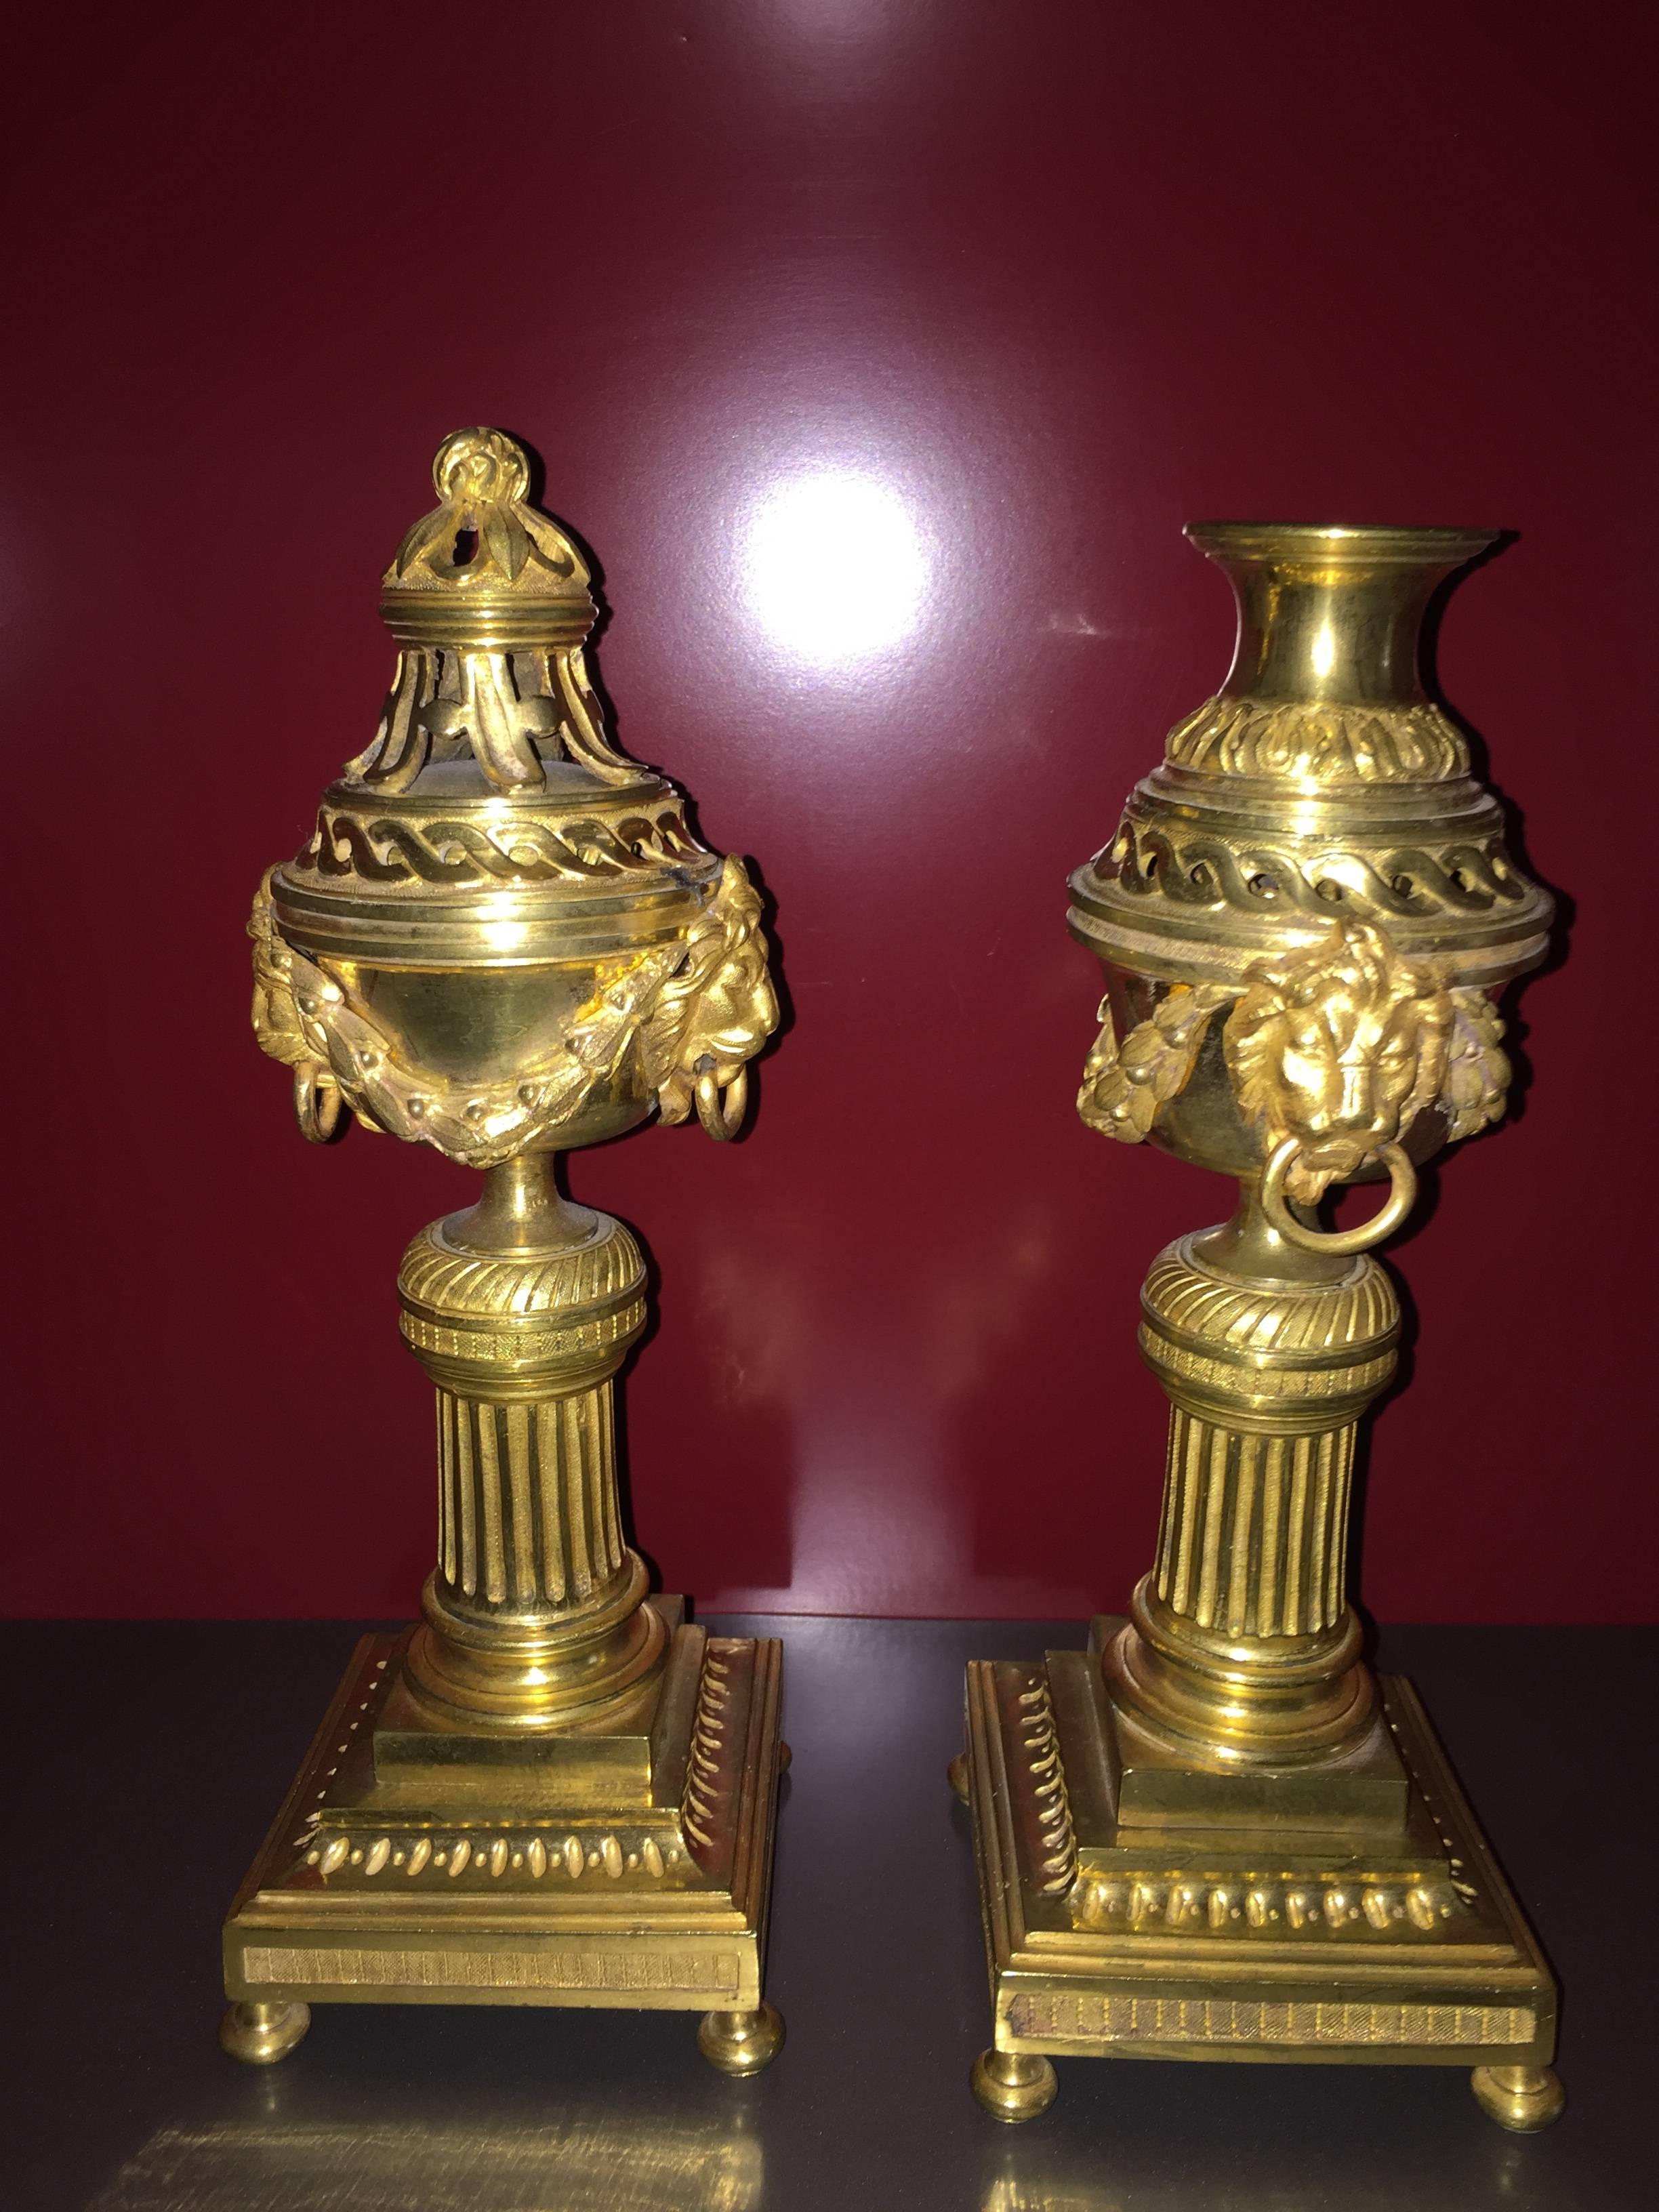 Pair of incense burners. The pot-pourri is forming candlesticks, Louis XVI of the late eighteenth century, French origin. Bonze finely carved and gilded lion masks with handles. Bases pedestal decorated with a frieze, fluted.